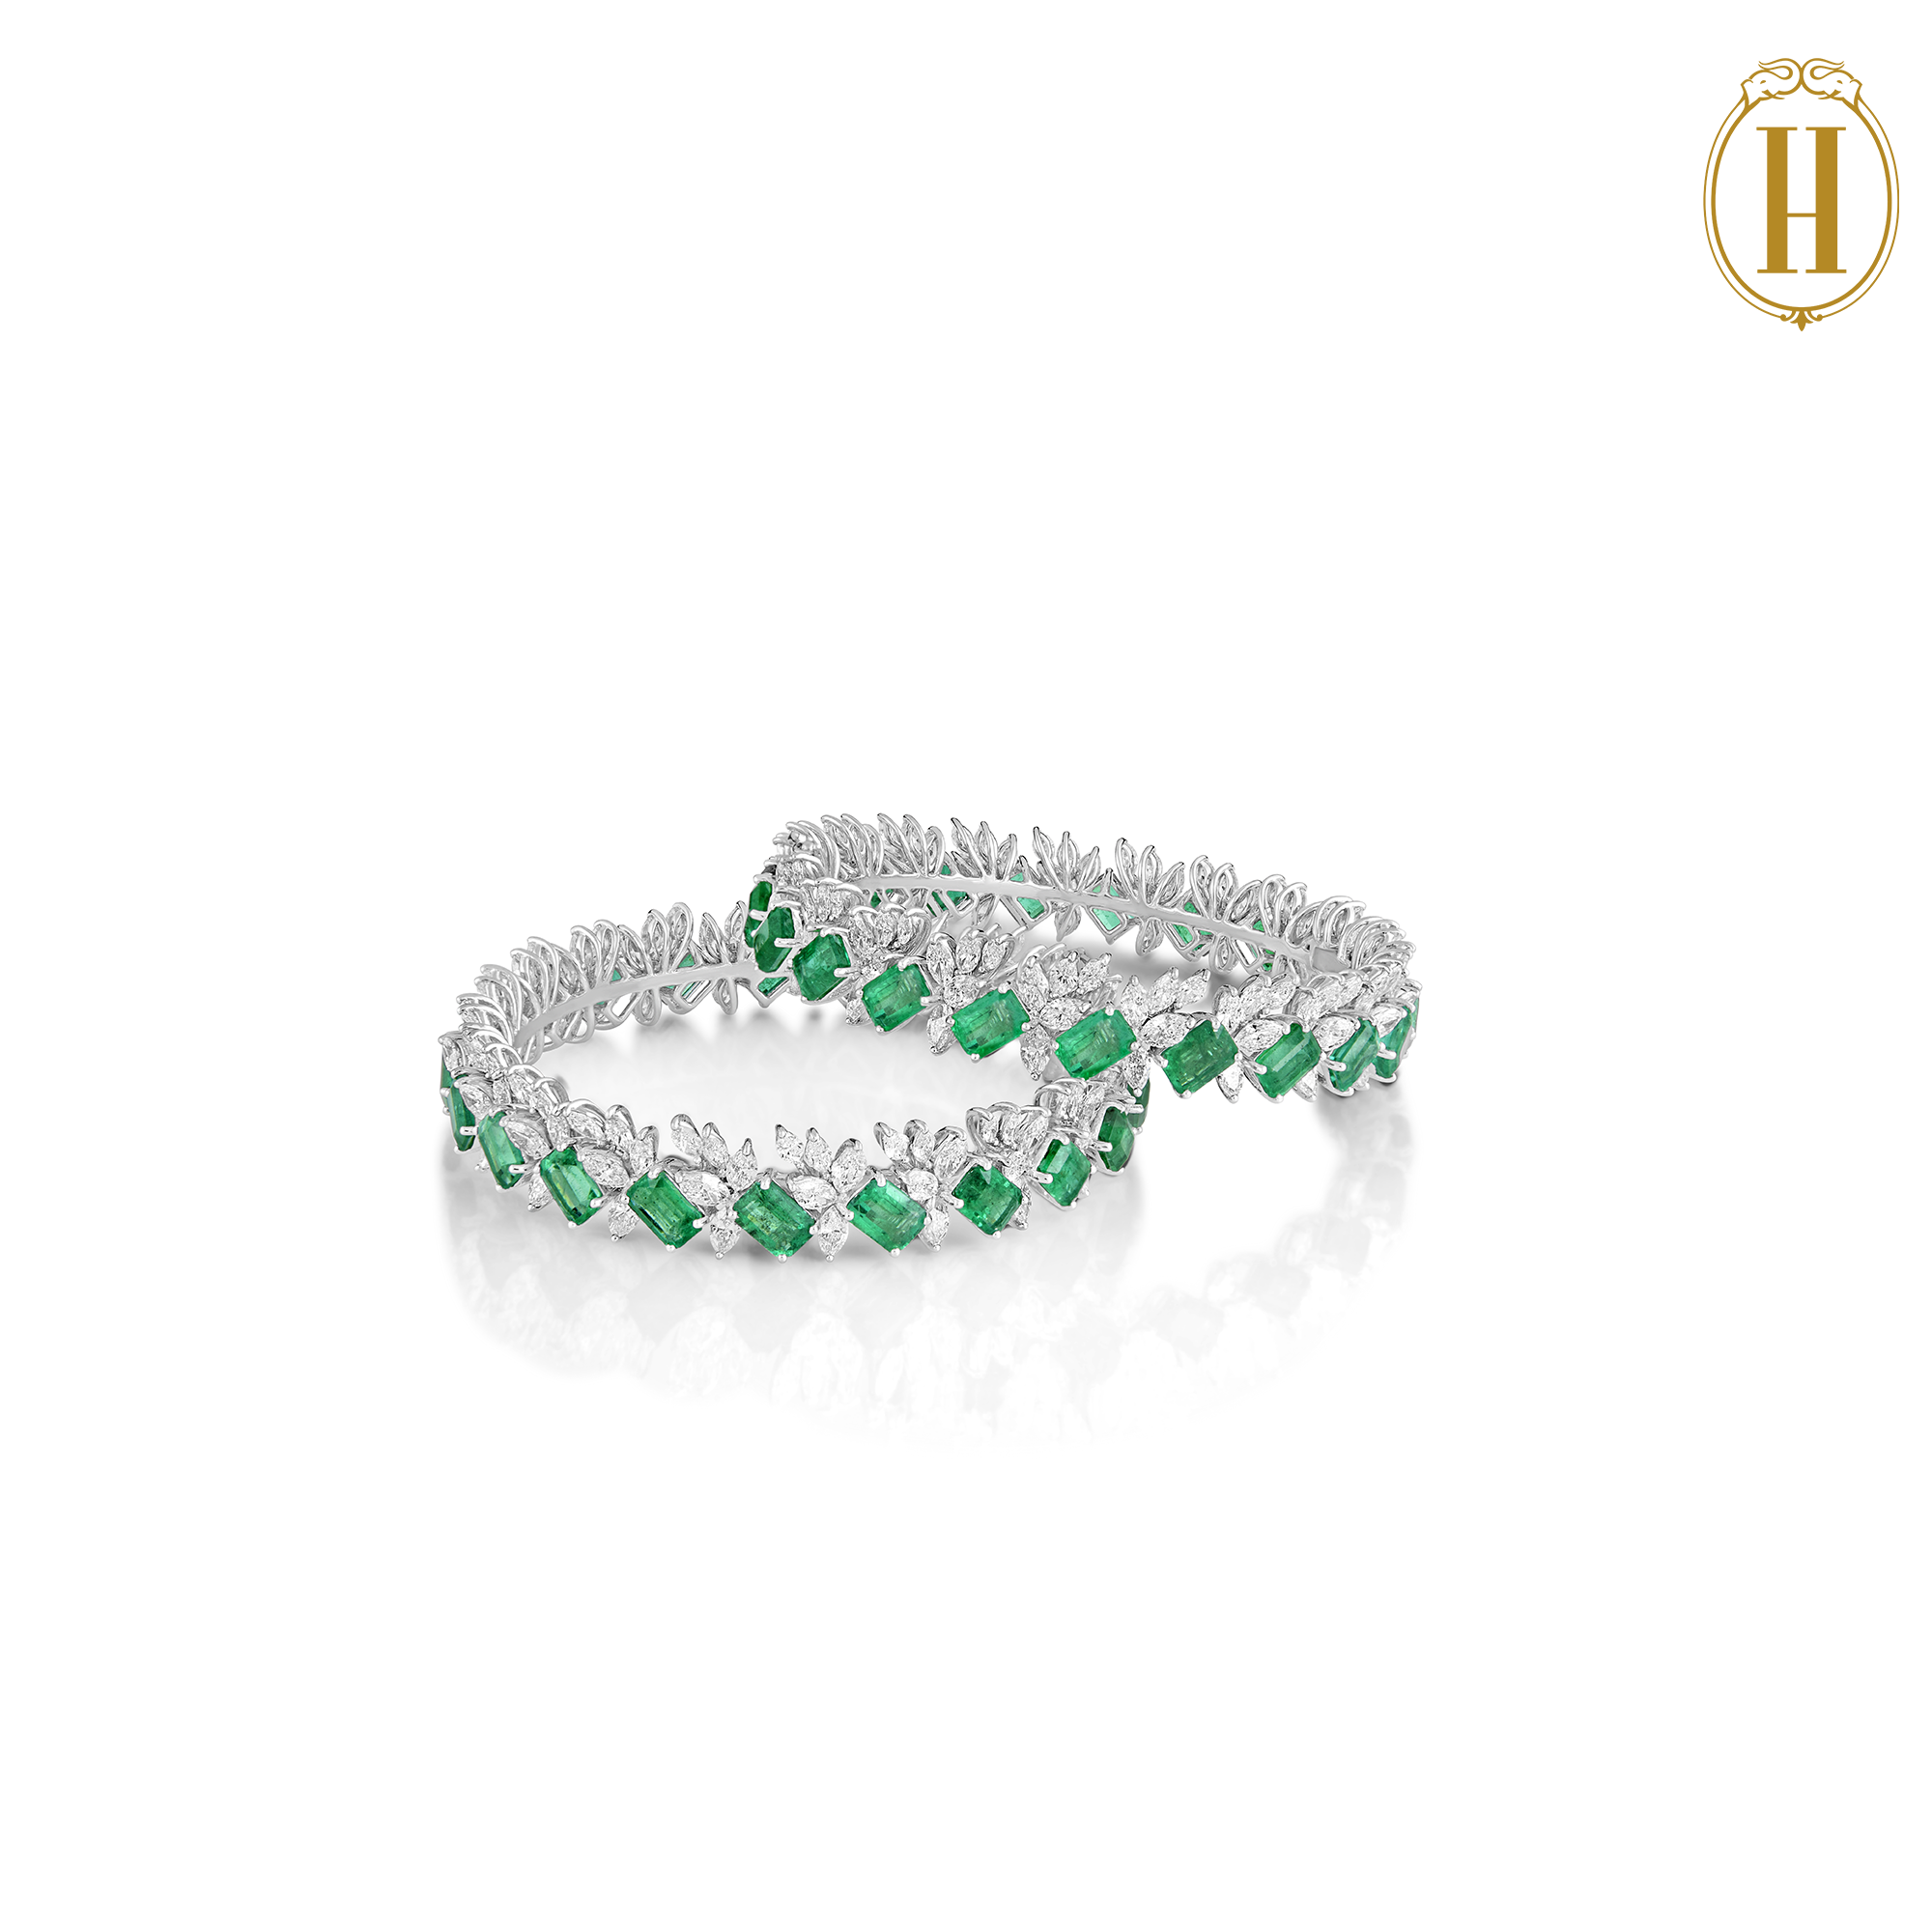 Exclusive Emerald Green Silver Plated Diamond Bracelet For Women